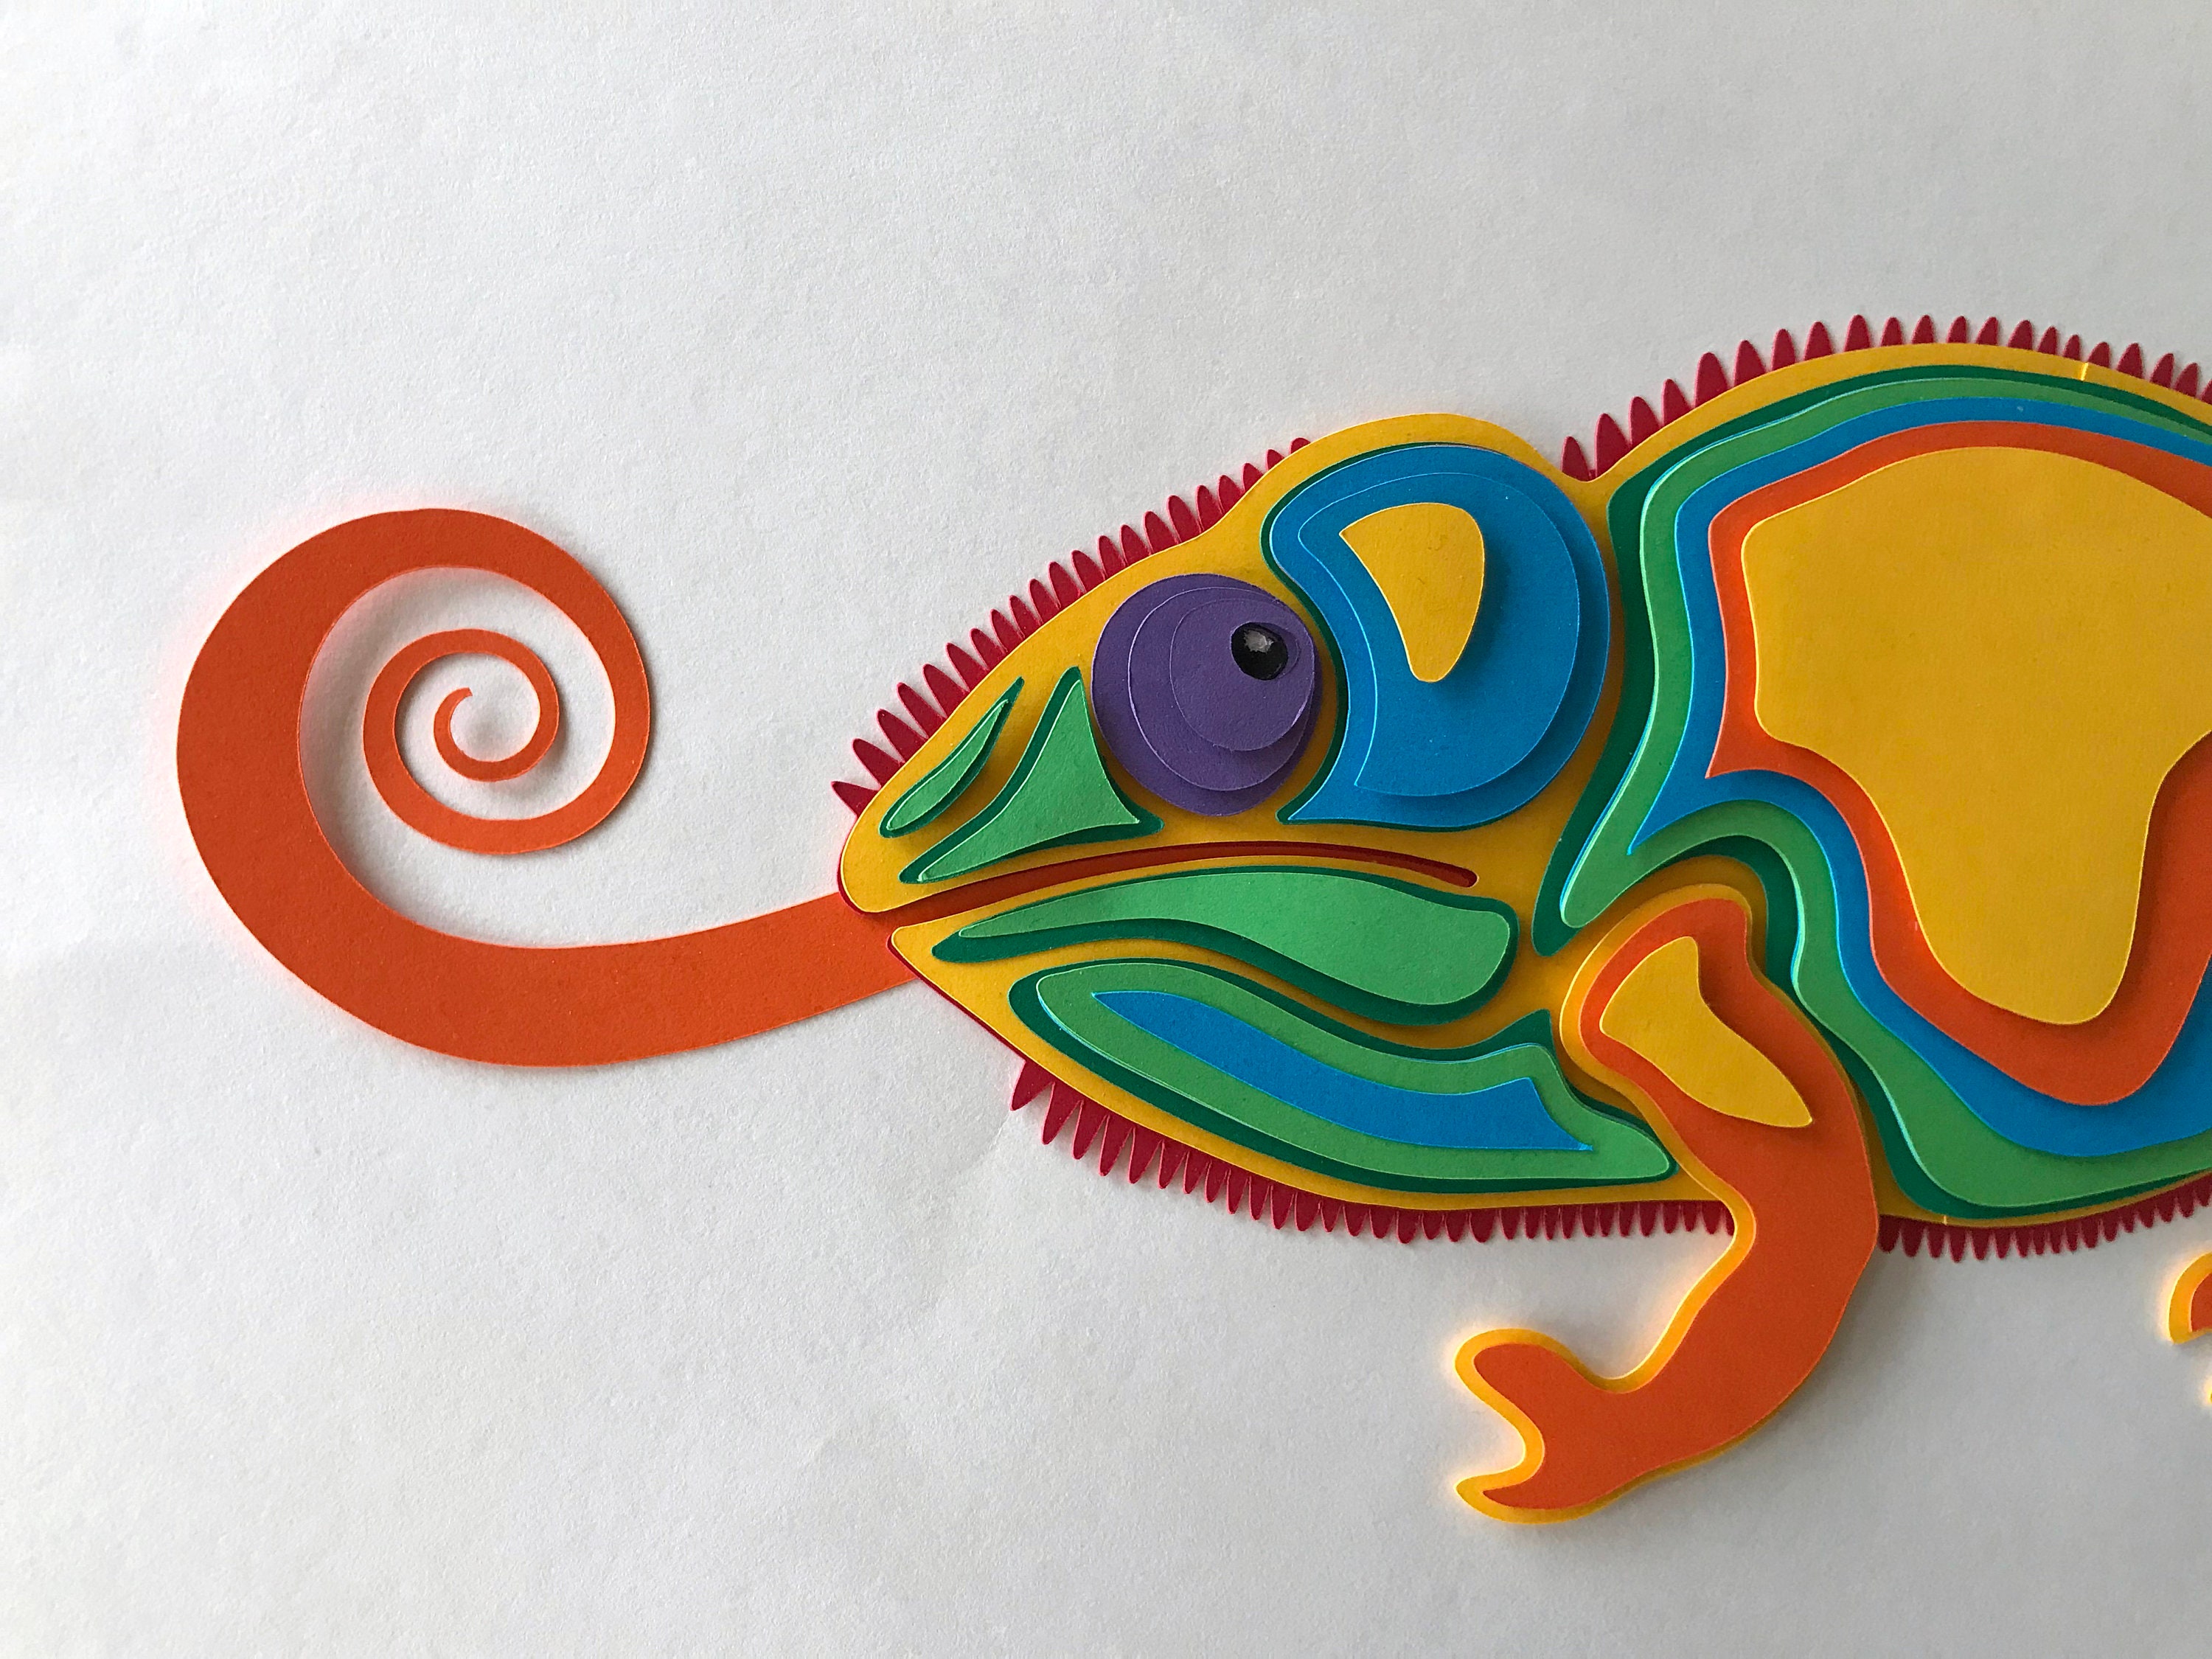 Quilling Paper Craft Template Chameleon, Paper 3D Pattern, сolourful  Chameleon Template, Png File,chameleon Paper Quilling Art, DIGITAL ONLY 